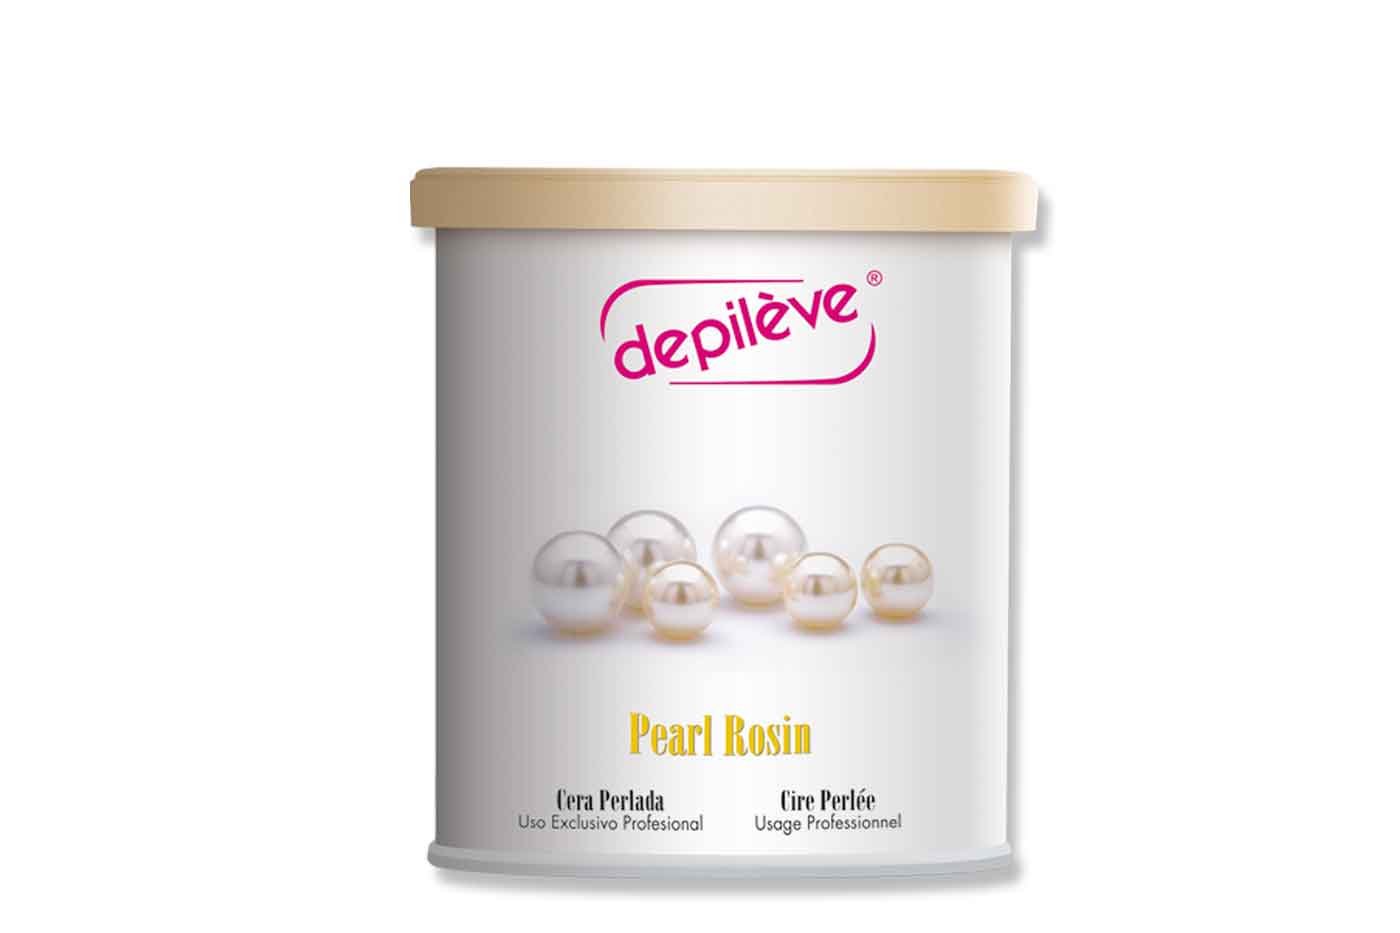 Depileve’s PEARL ROSIN wax for satin smooth skin